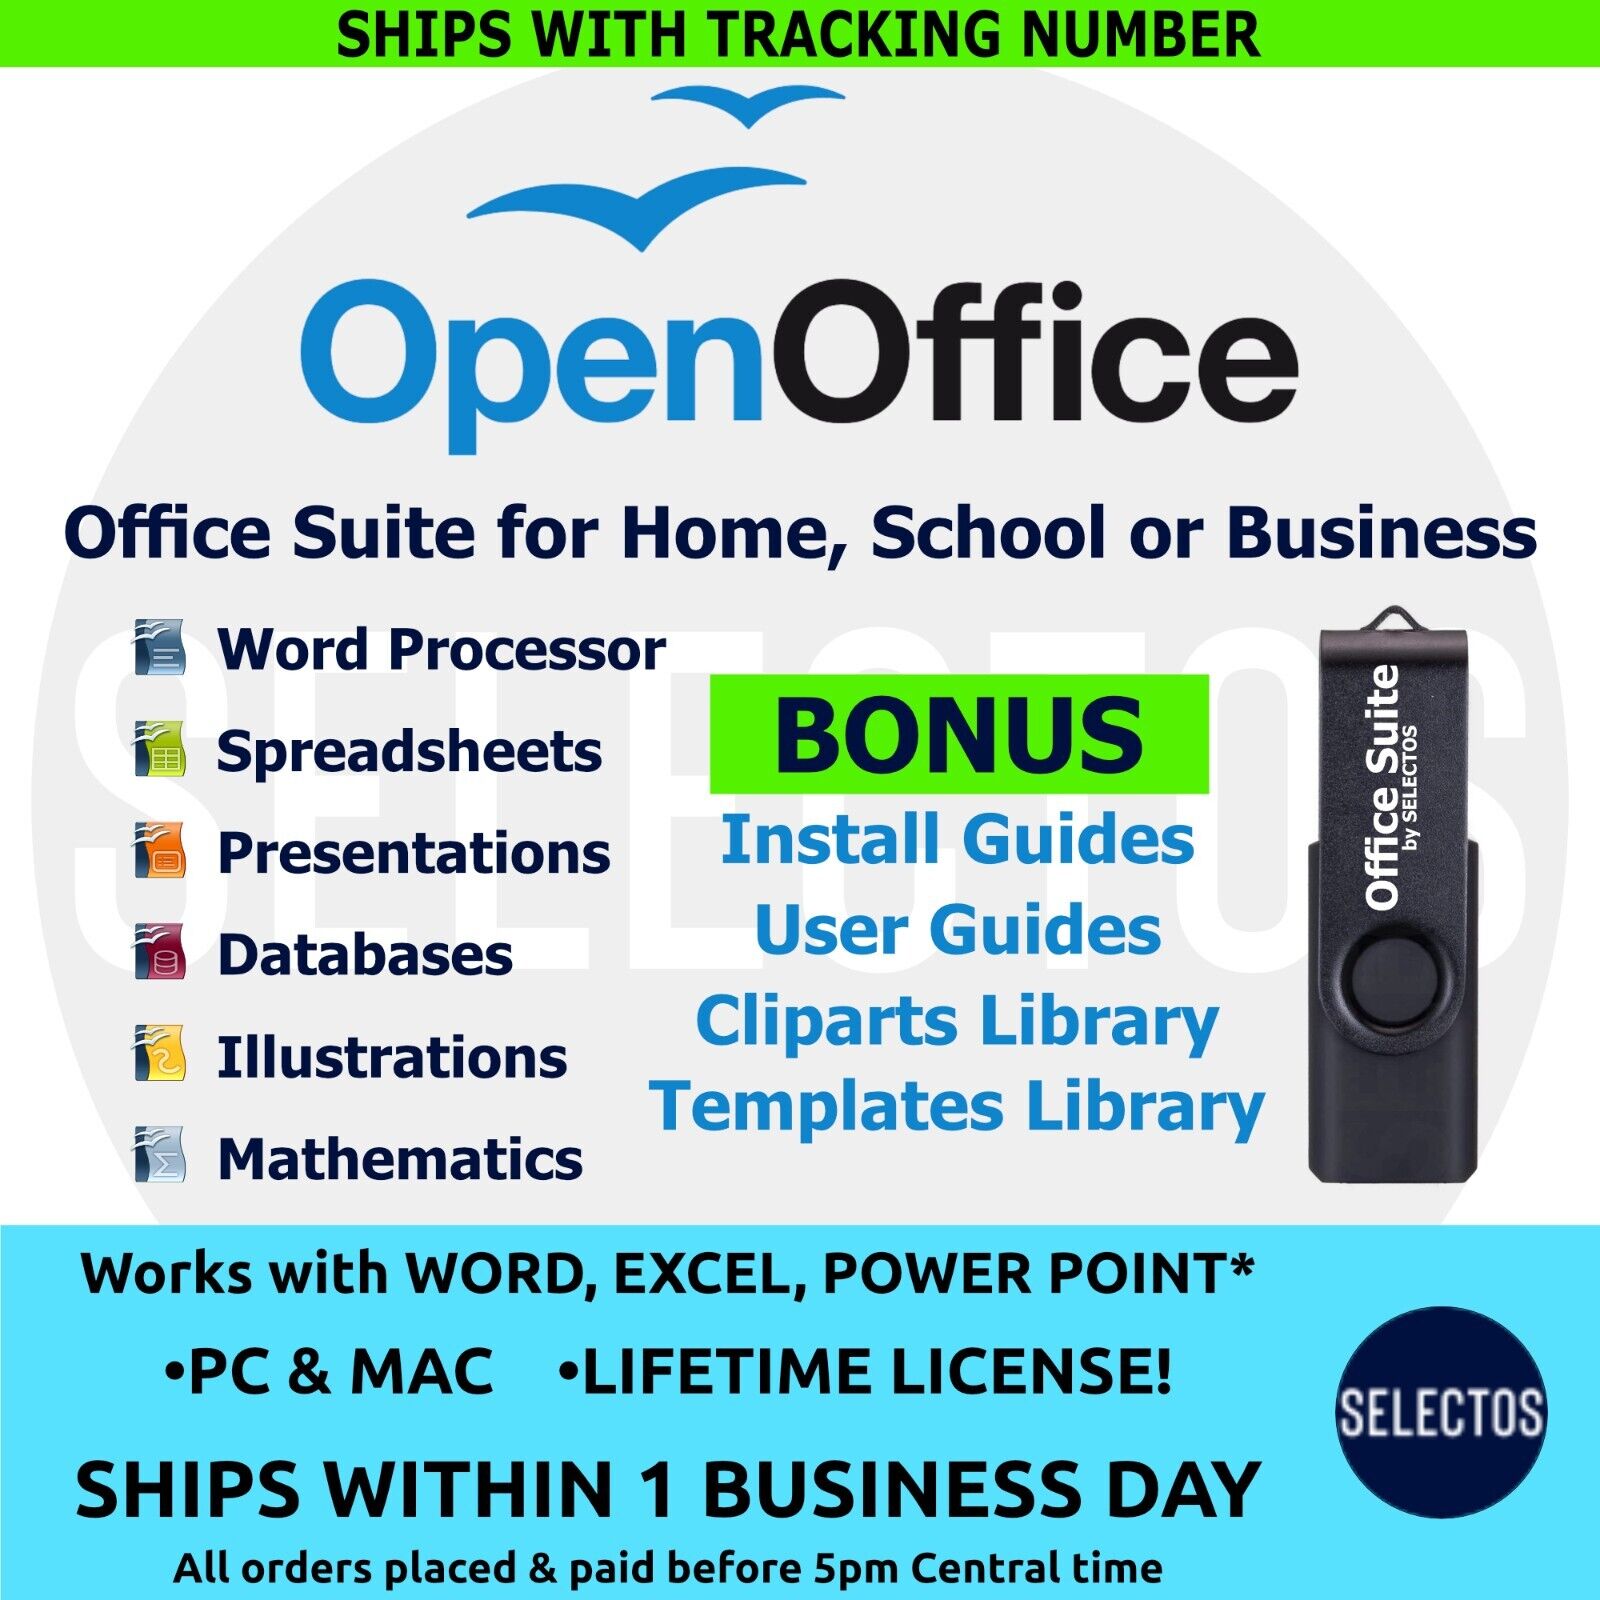 Open Office Software Suite for Windows-Mac. Home, School or Business - USB Drive